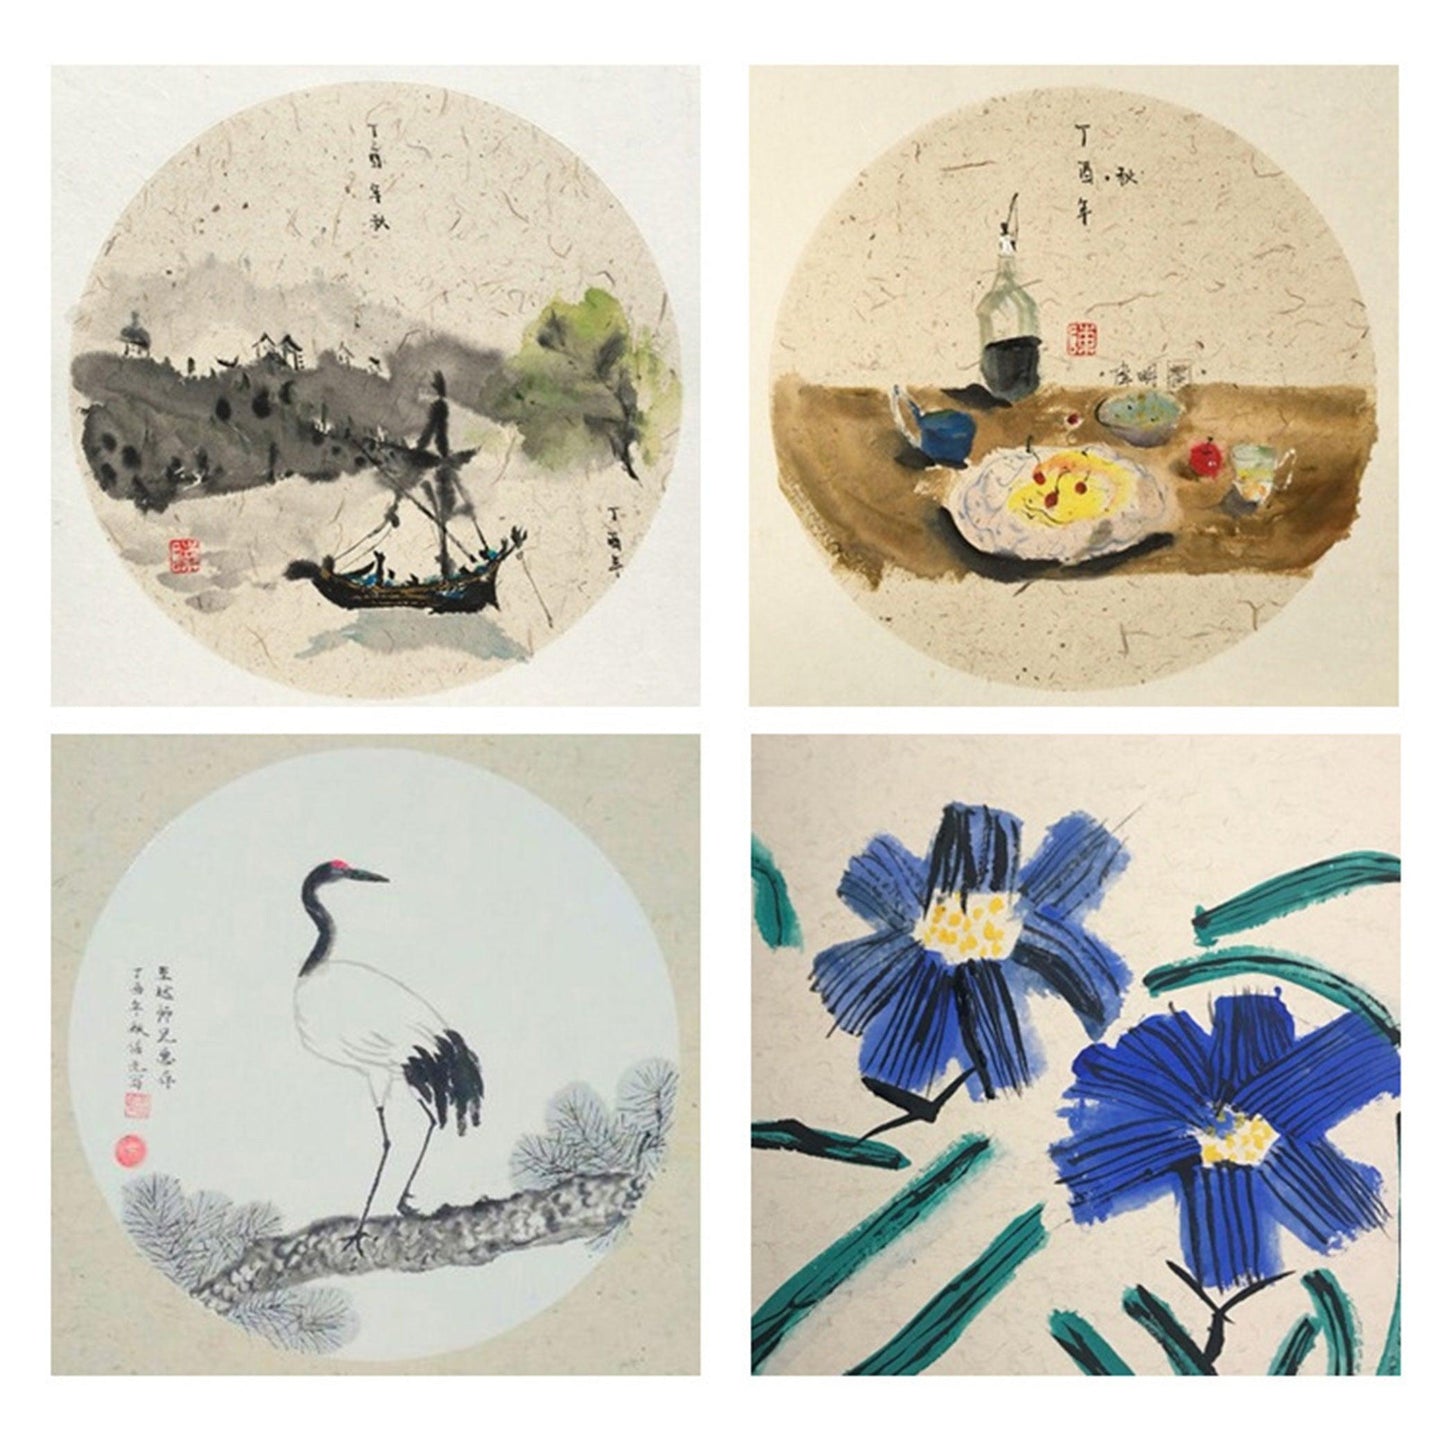 Xuan paper round calligraphy and painting paper Yunlong paper Chinese painting calligraphy Chinese style practice art student school painting 10 sheets NP-050026 - CHL-STORE 